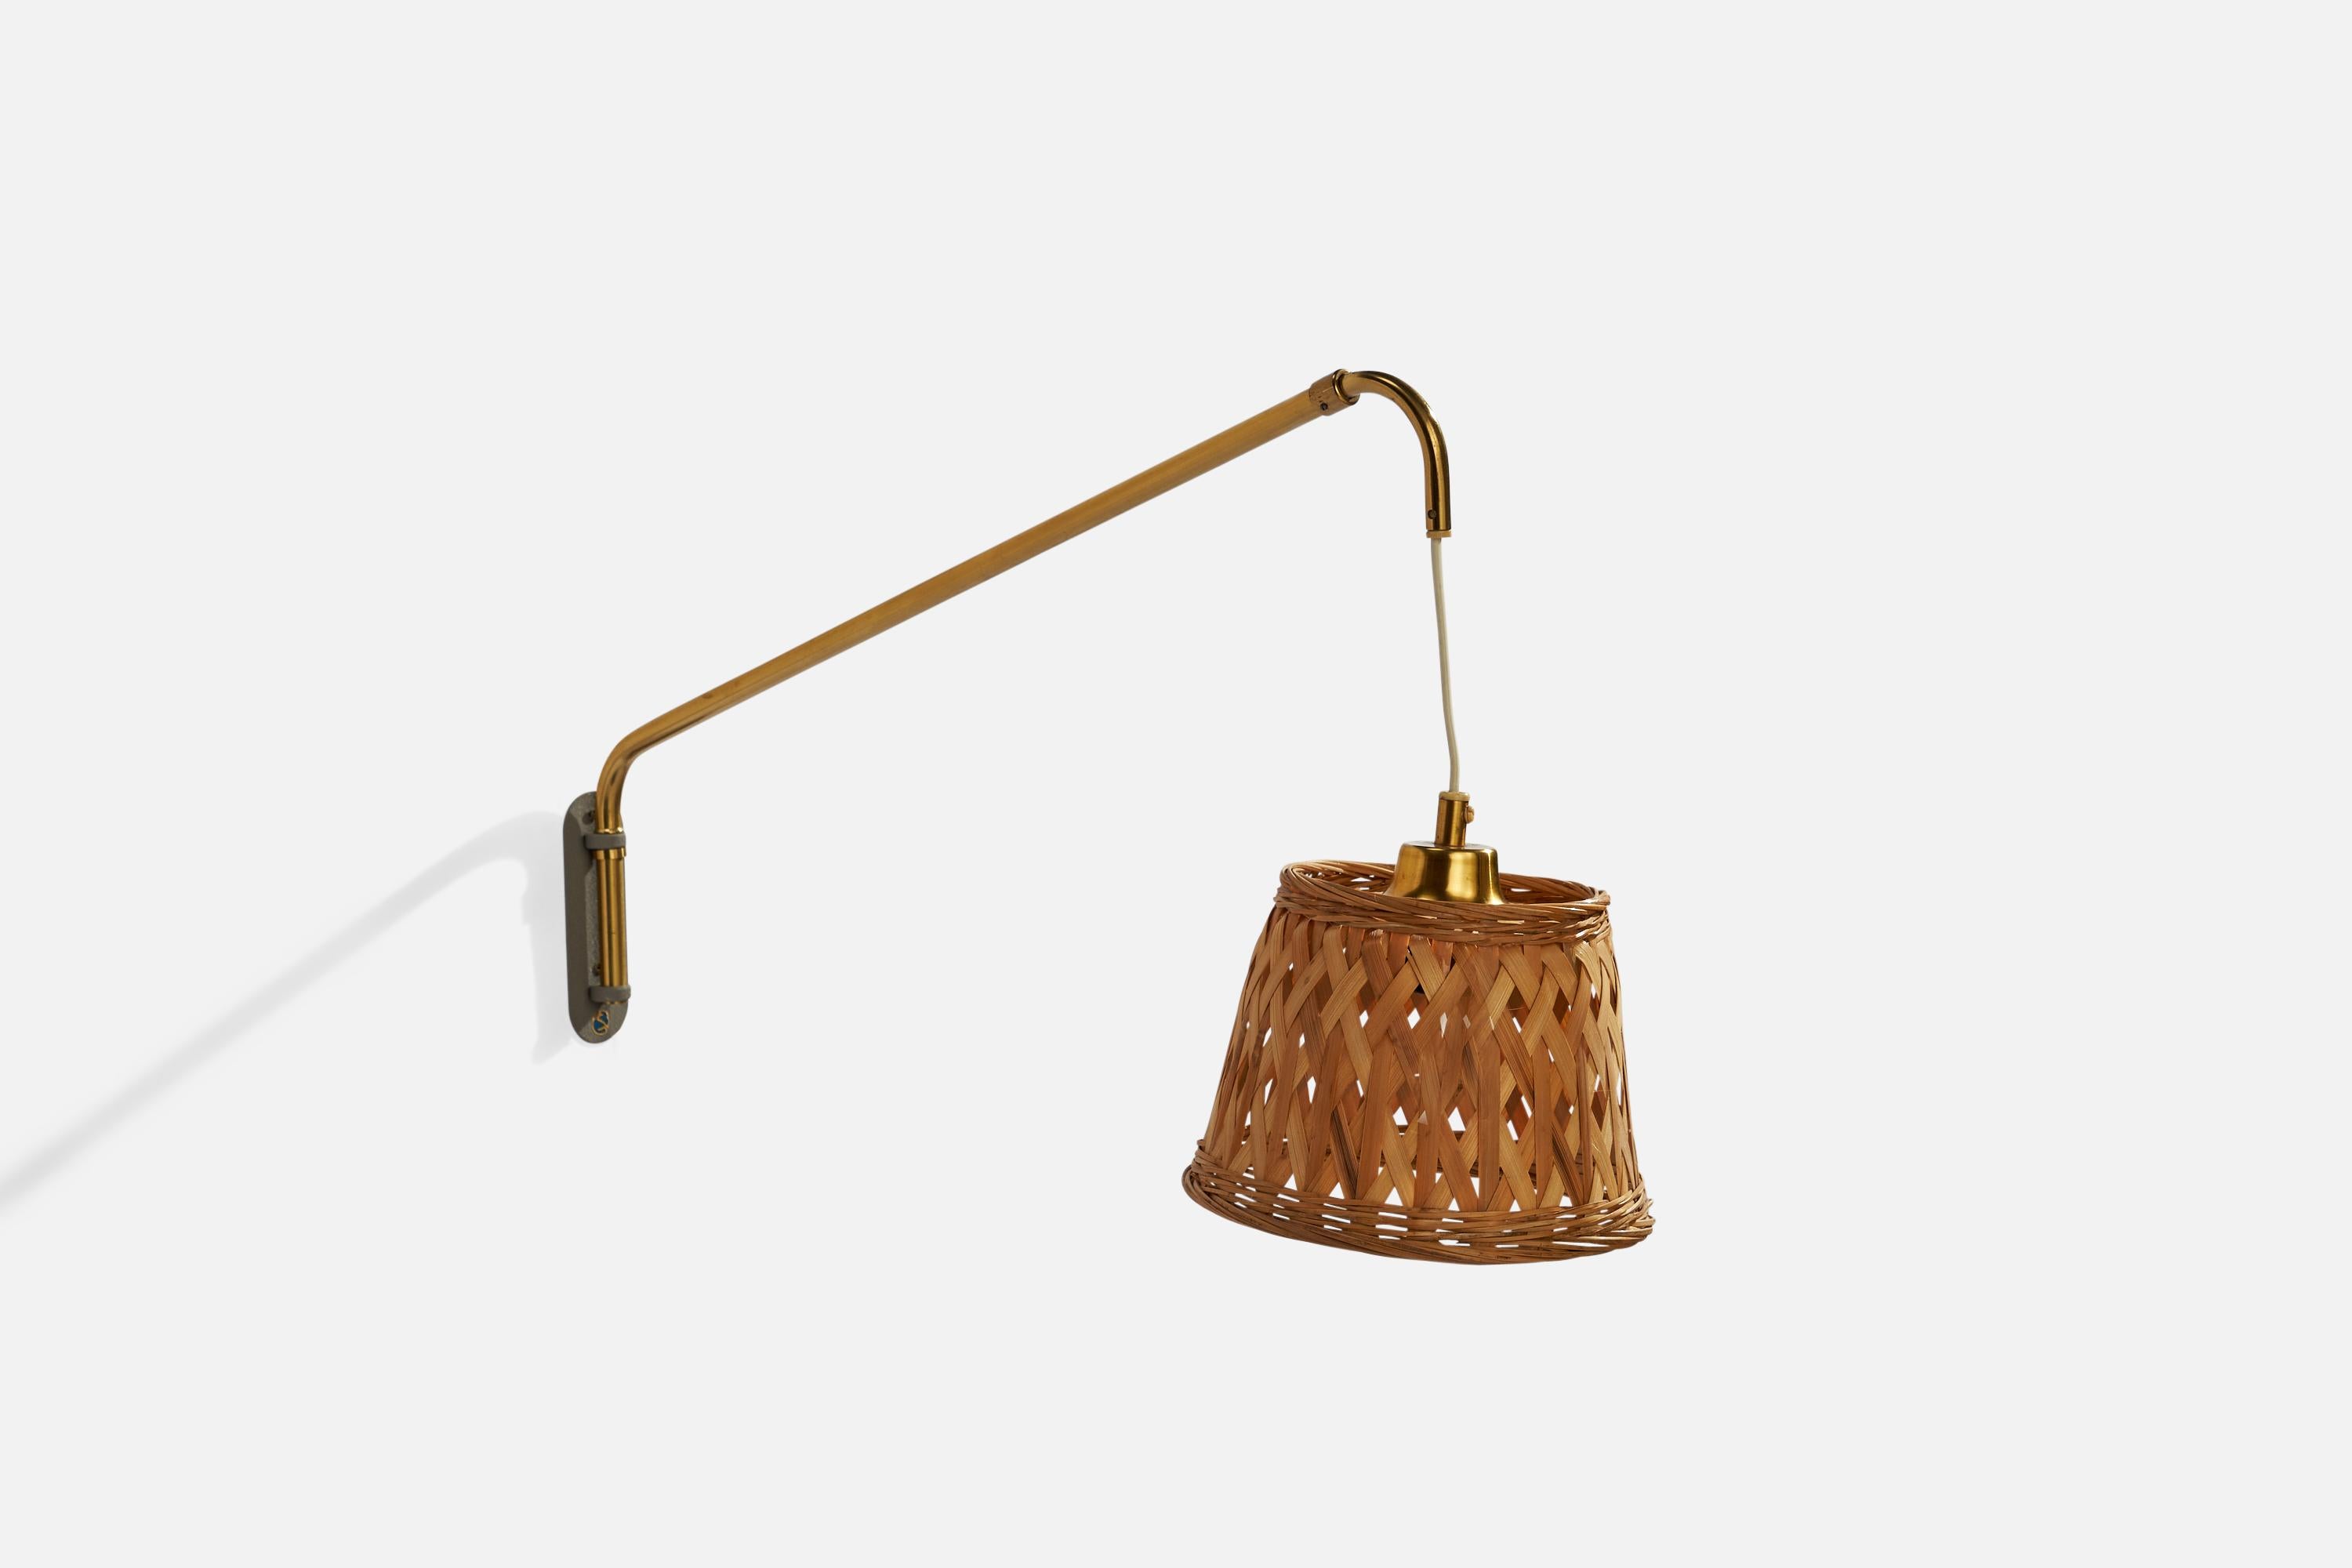 An adjustable brass and rattan wall light designed and produced by Möllers Armatur Elektriska, Sweden, 1940s.

Overall Dimensions (inches): 6.5”  H x 24”  W x 38.5” D
Back Plate Dimensions (inches): 4.75” H x 1.75”  W x .25”  D
Bulb Specifications: